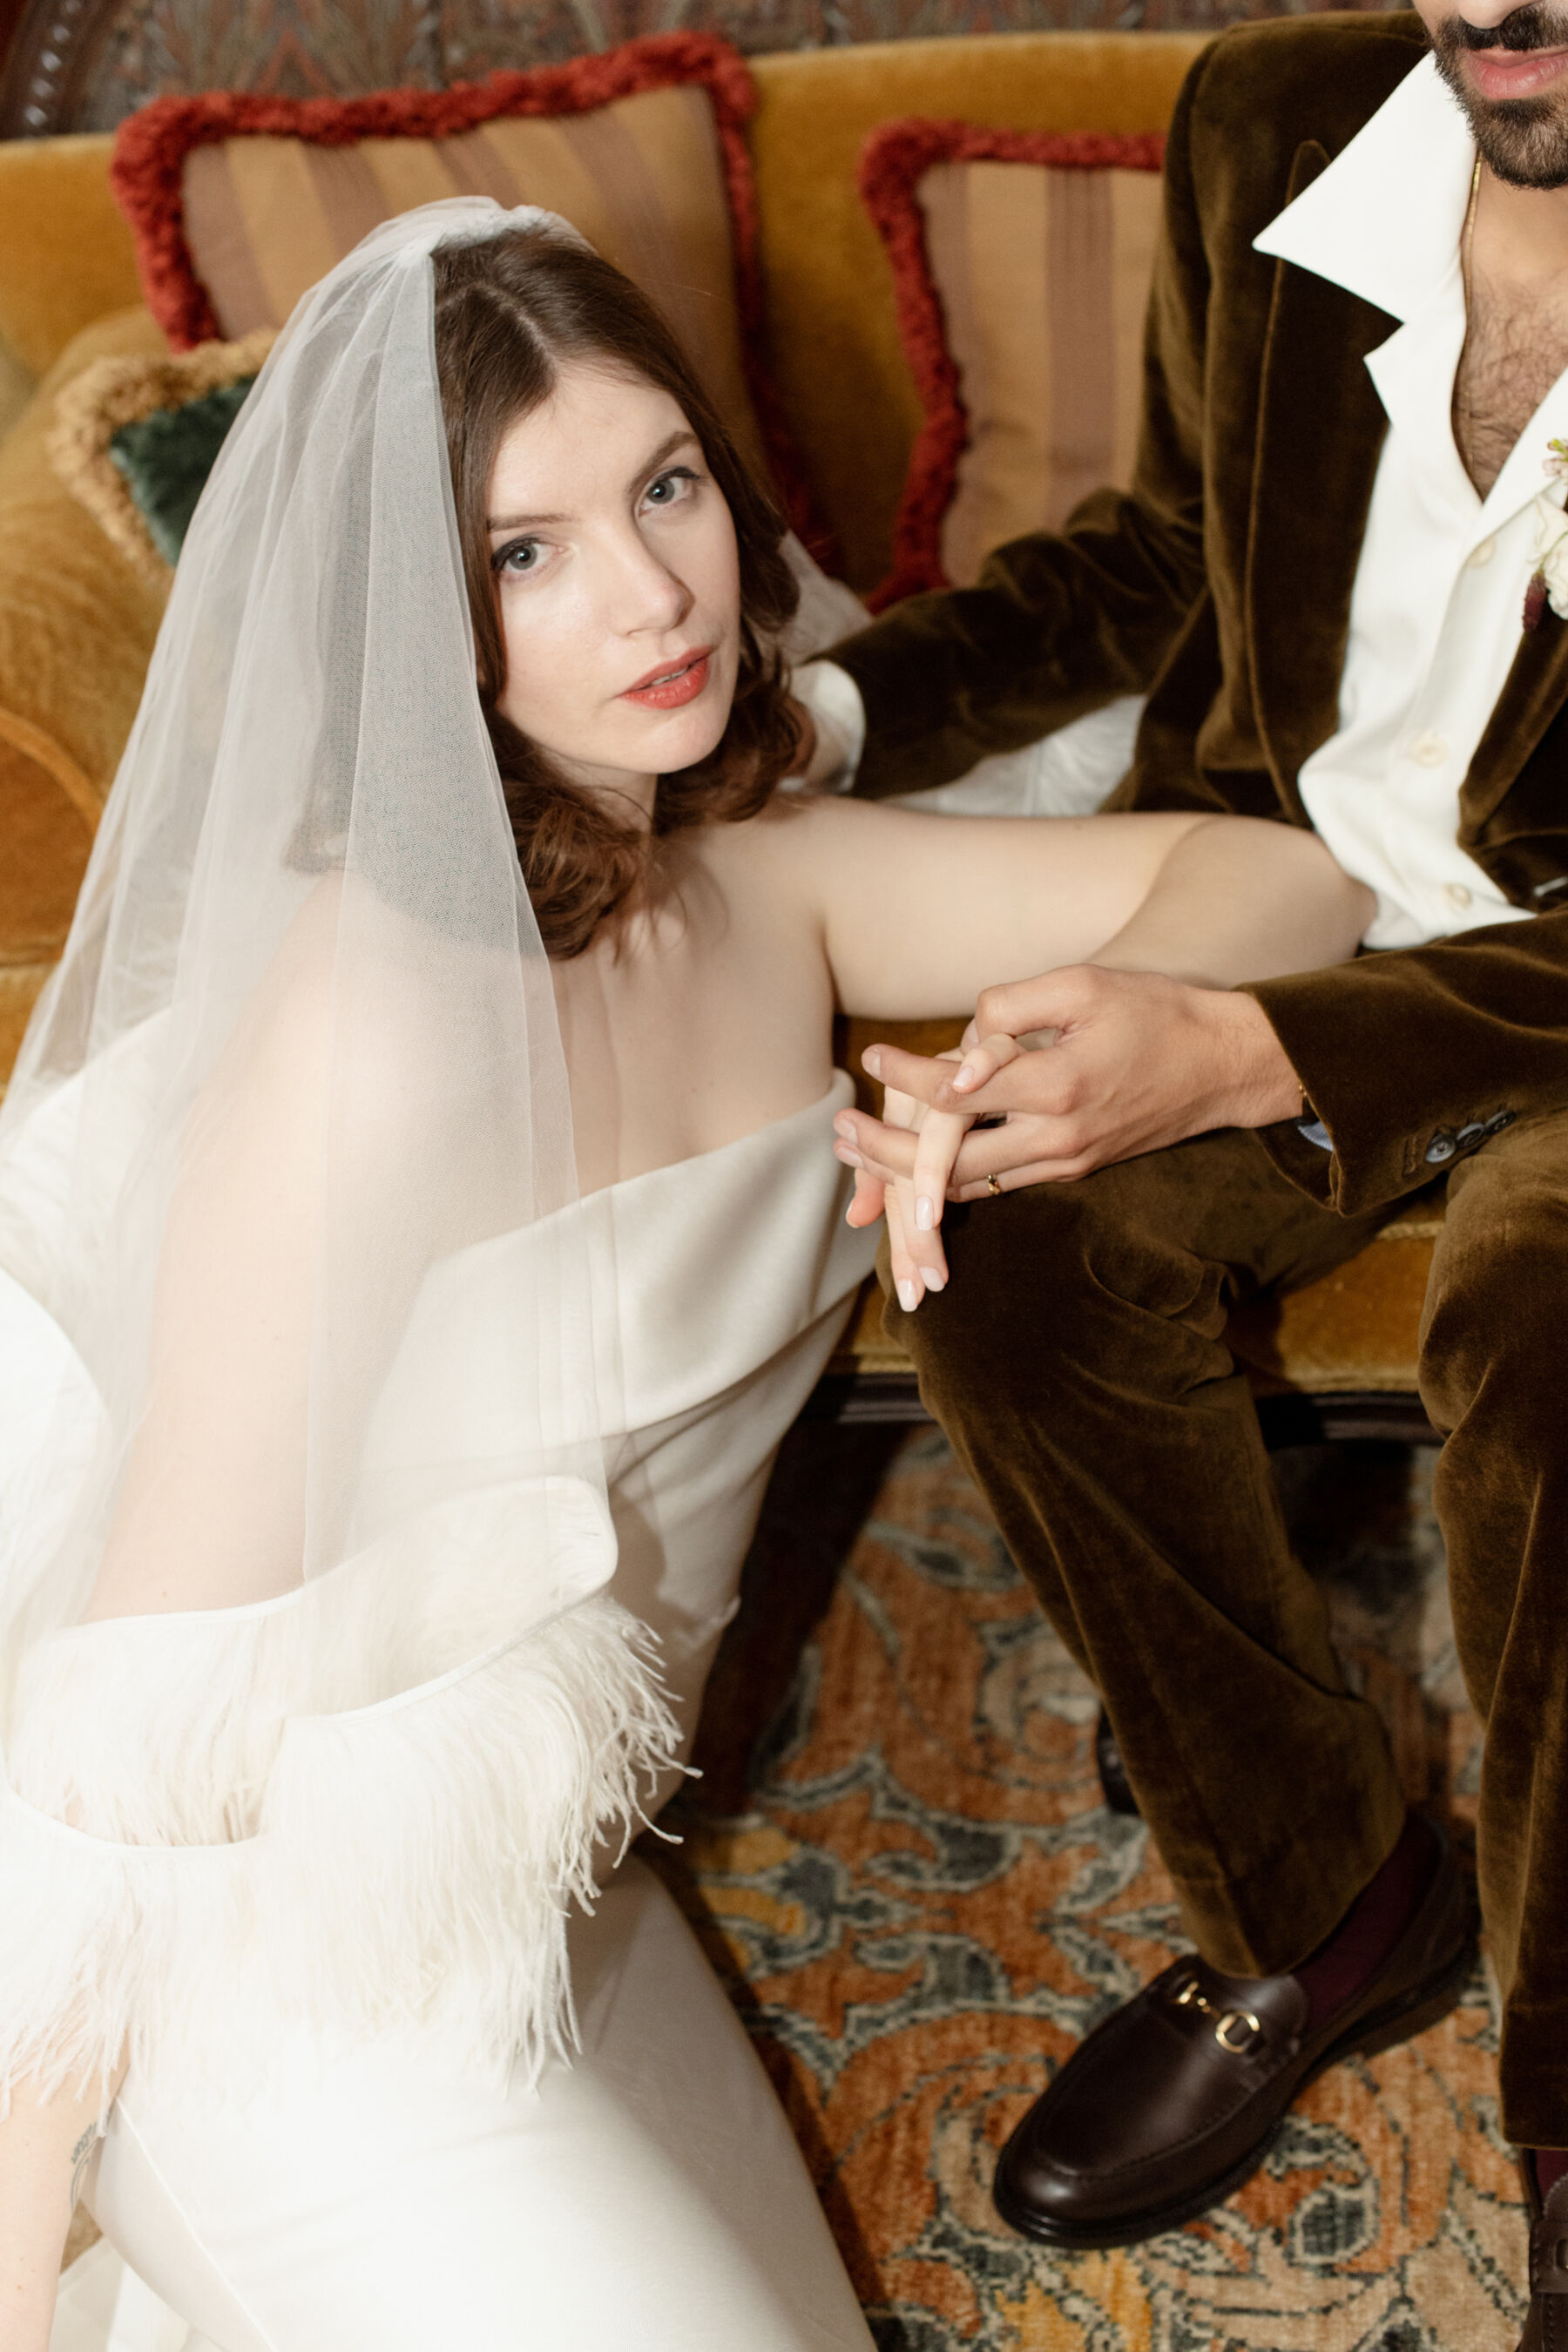 Stylish modern bride wearing a feather veil by Christopher Kane.